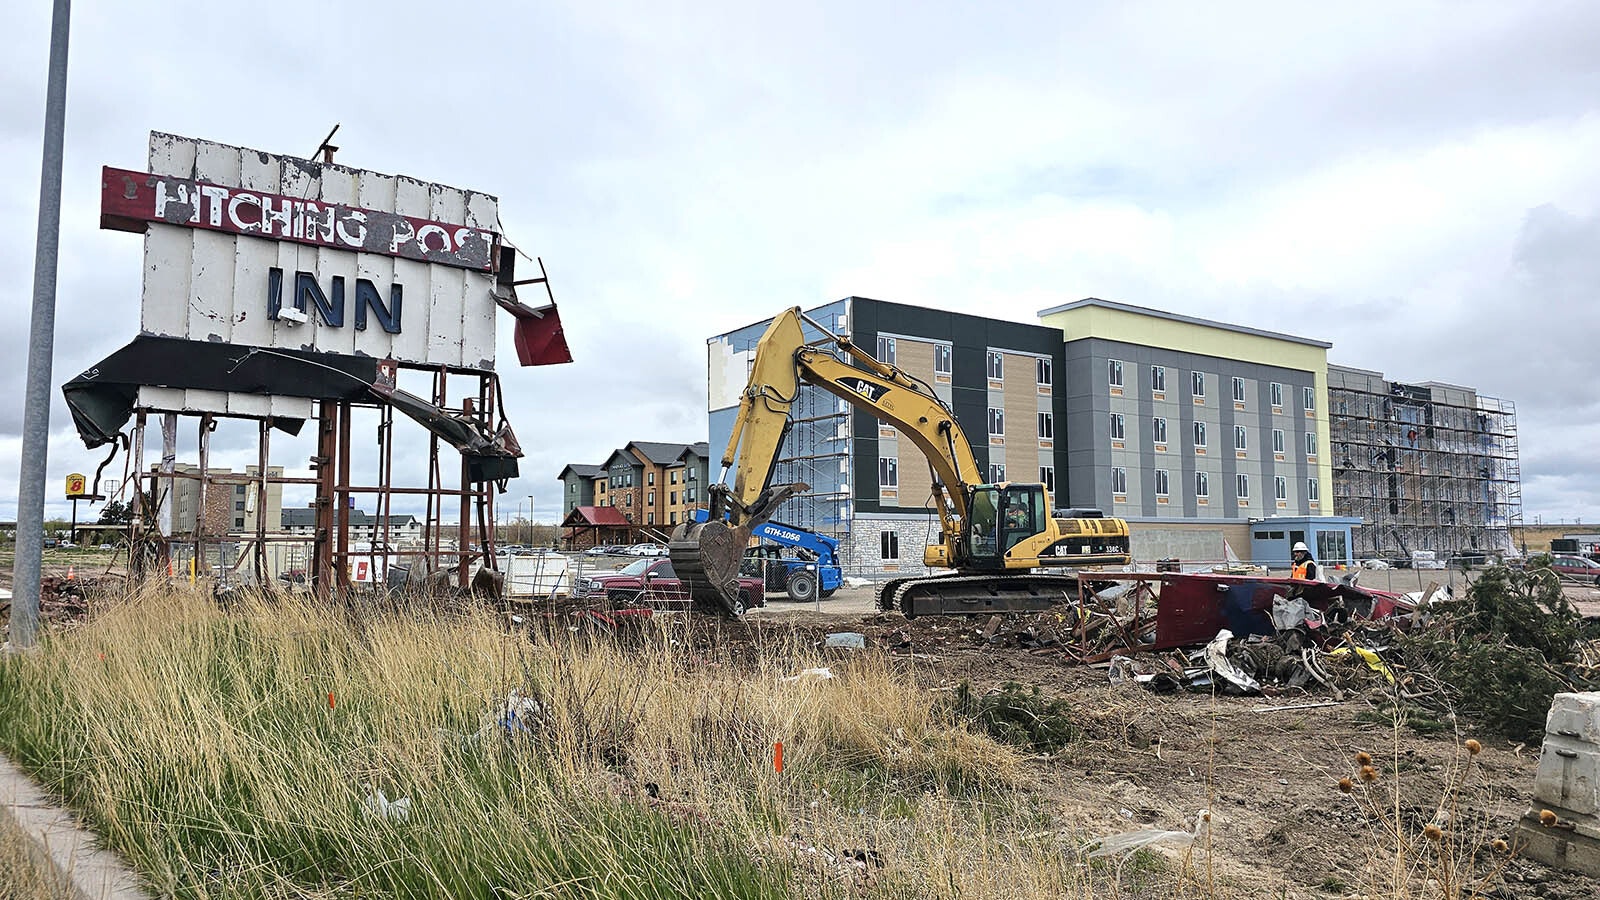 Workers dig out around the Hitching Post Inn sign to take it down Thursday, May 9, 2024. A worker on site was telling passersby that the sign is coming down for good. It will be sent to a museum, if it survives the process.